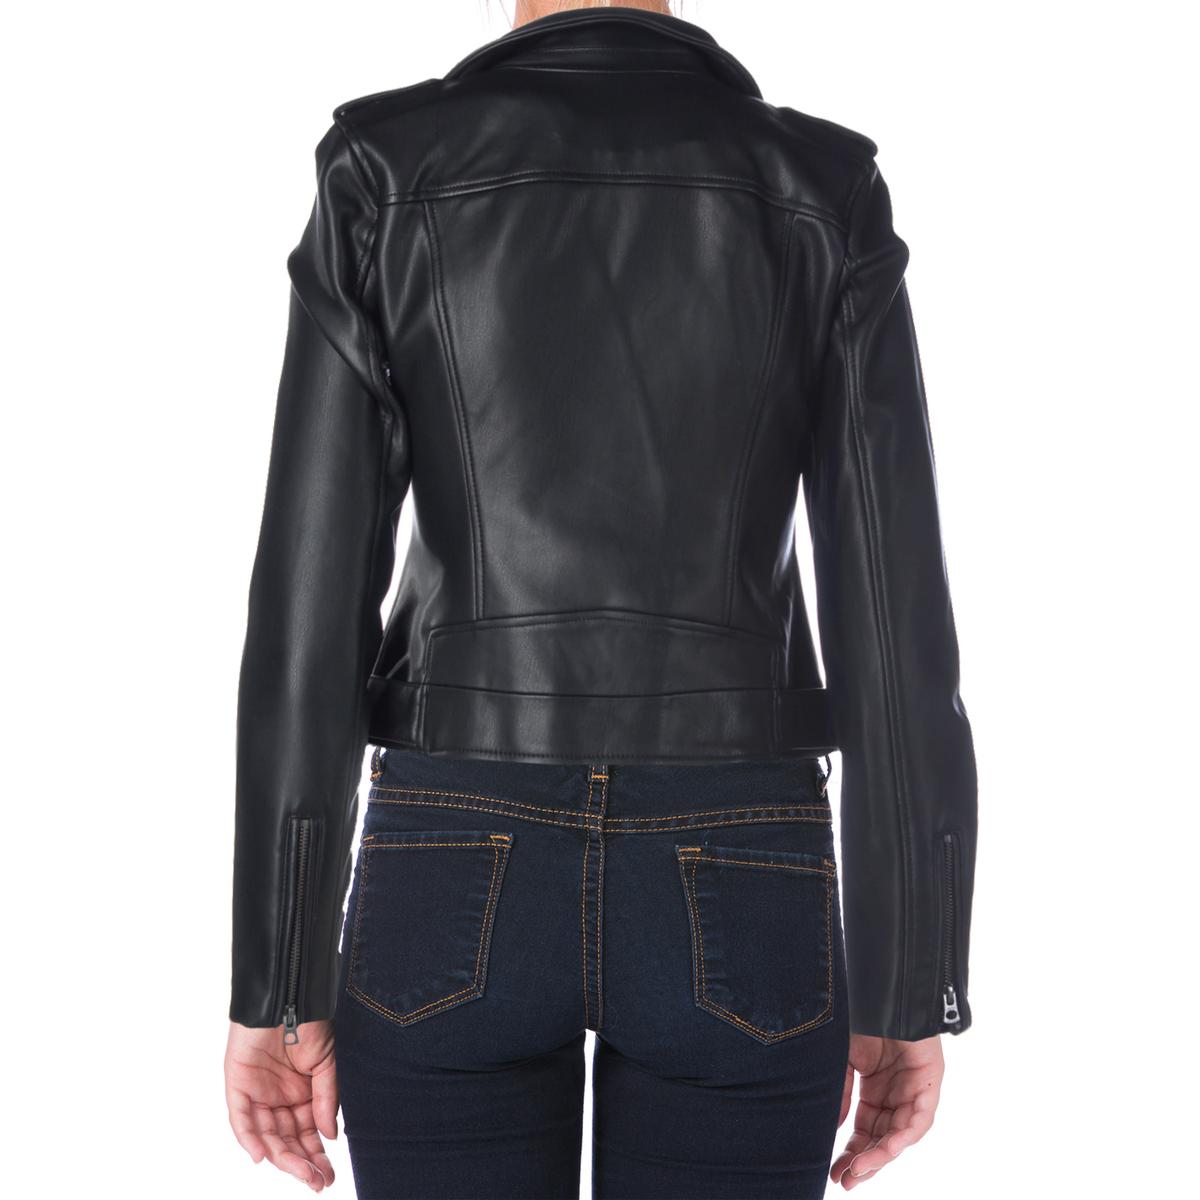 Lucky Brand Womens Black Faux Leather Bonded Motorcycle Jacket Coat XS ...